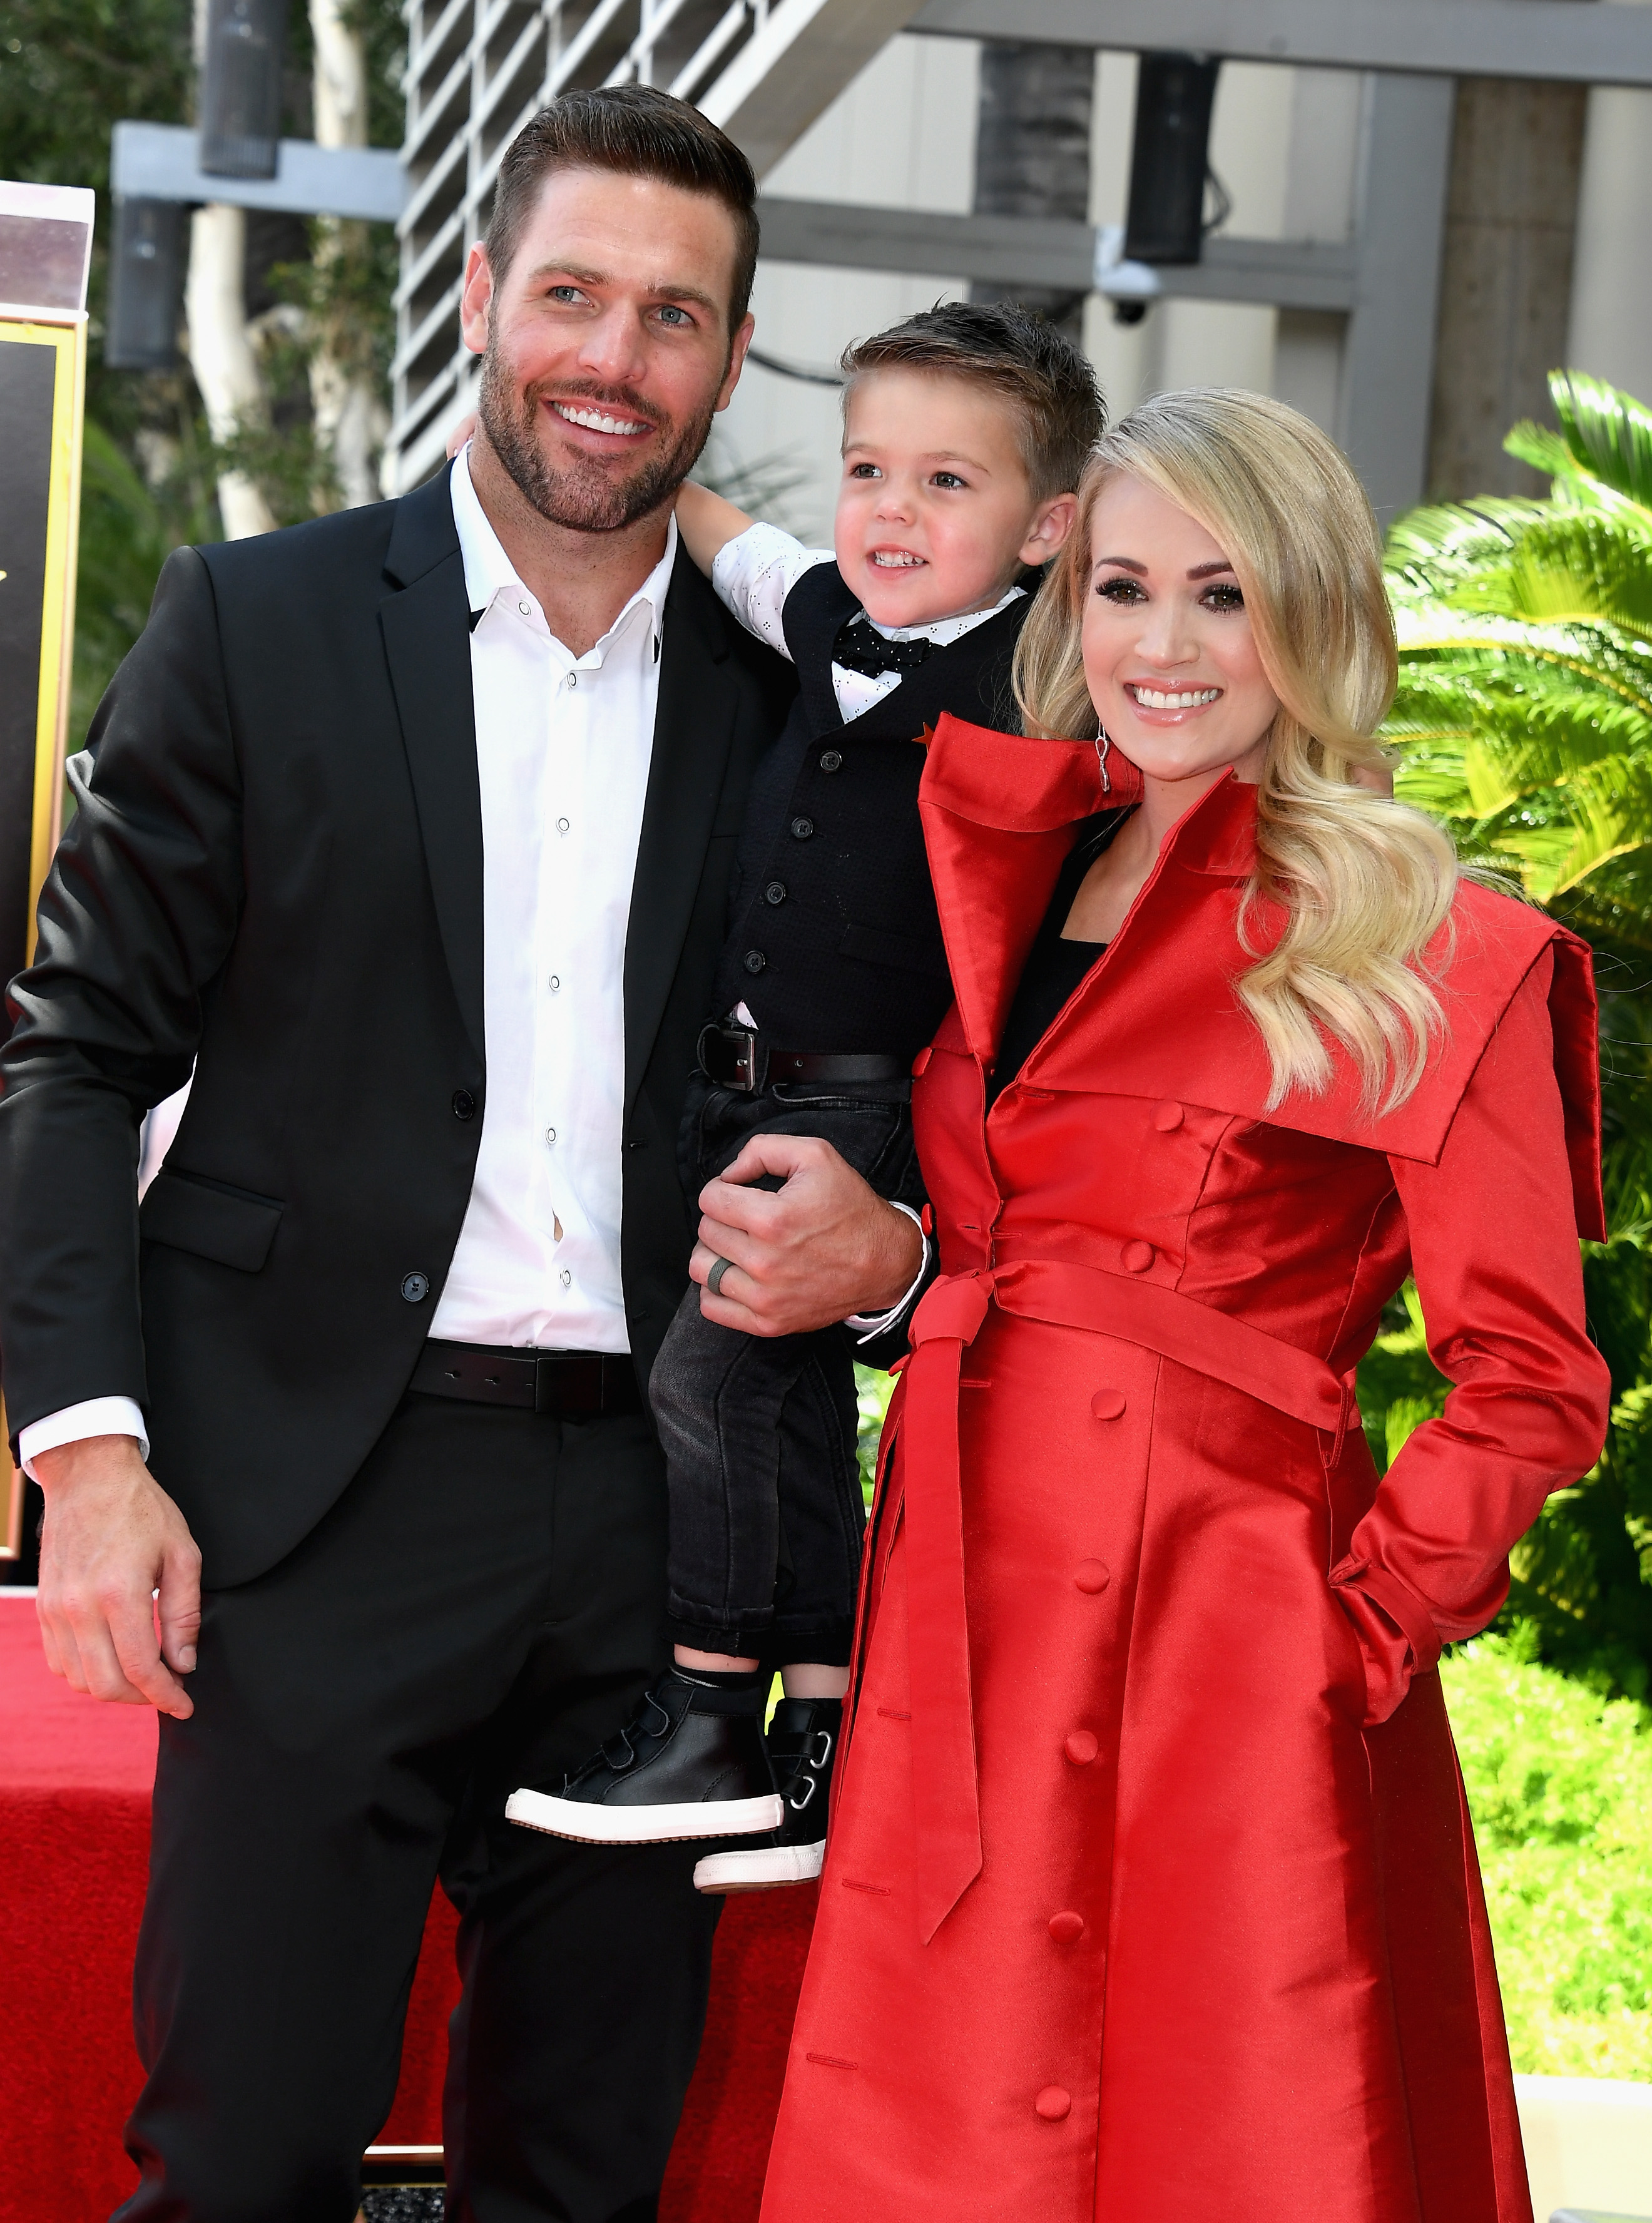 Mike Fisher, Isaiah Fisher, Carrie Underwood at the Hollywood Walk of Fame on September 20, 2018, in Los Angeles, California. | Source: Getty Images